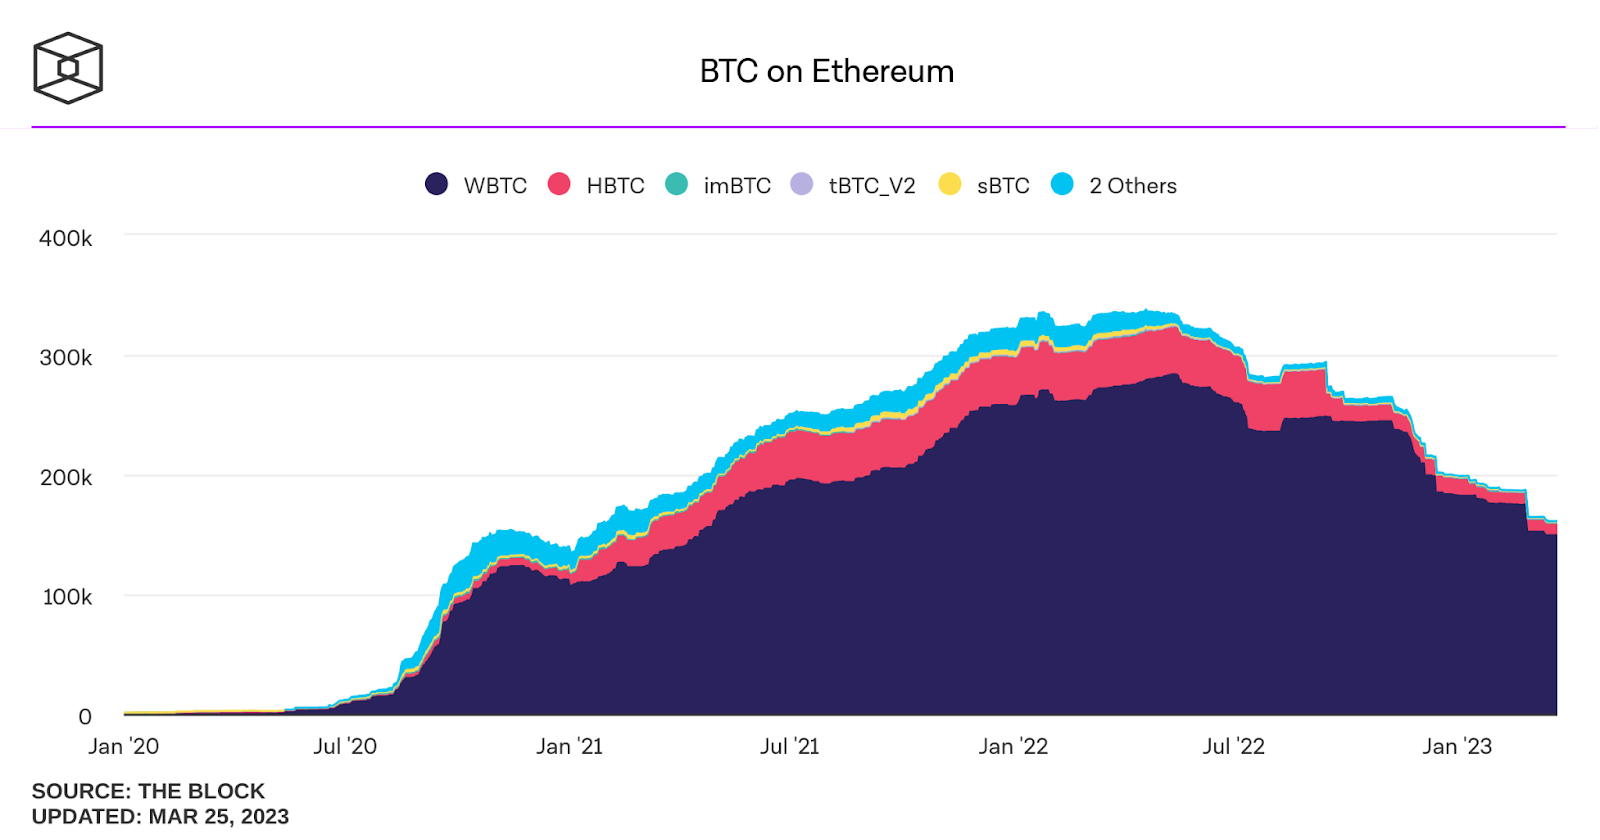 Figure 6: Over 150k Bitcoin are currently wrapped as wBTC on Ethereum.